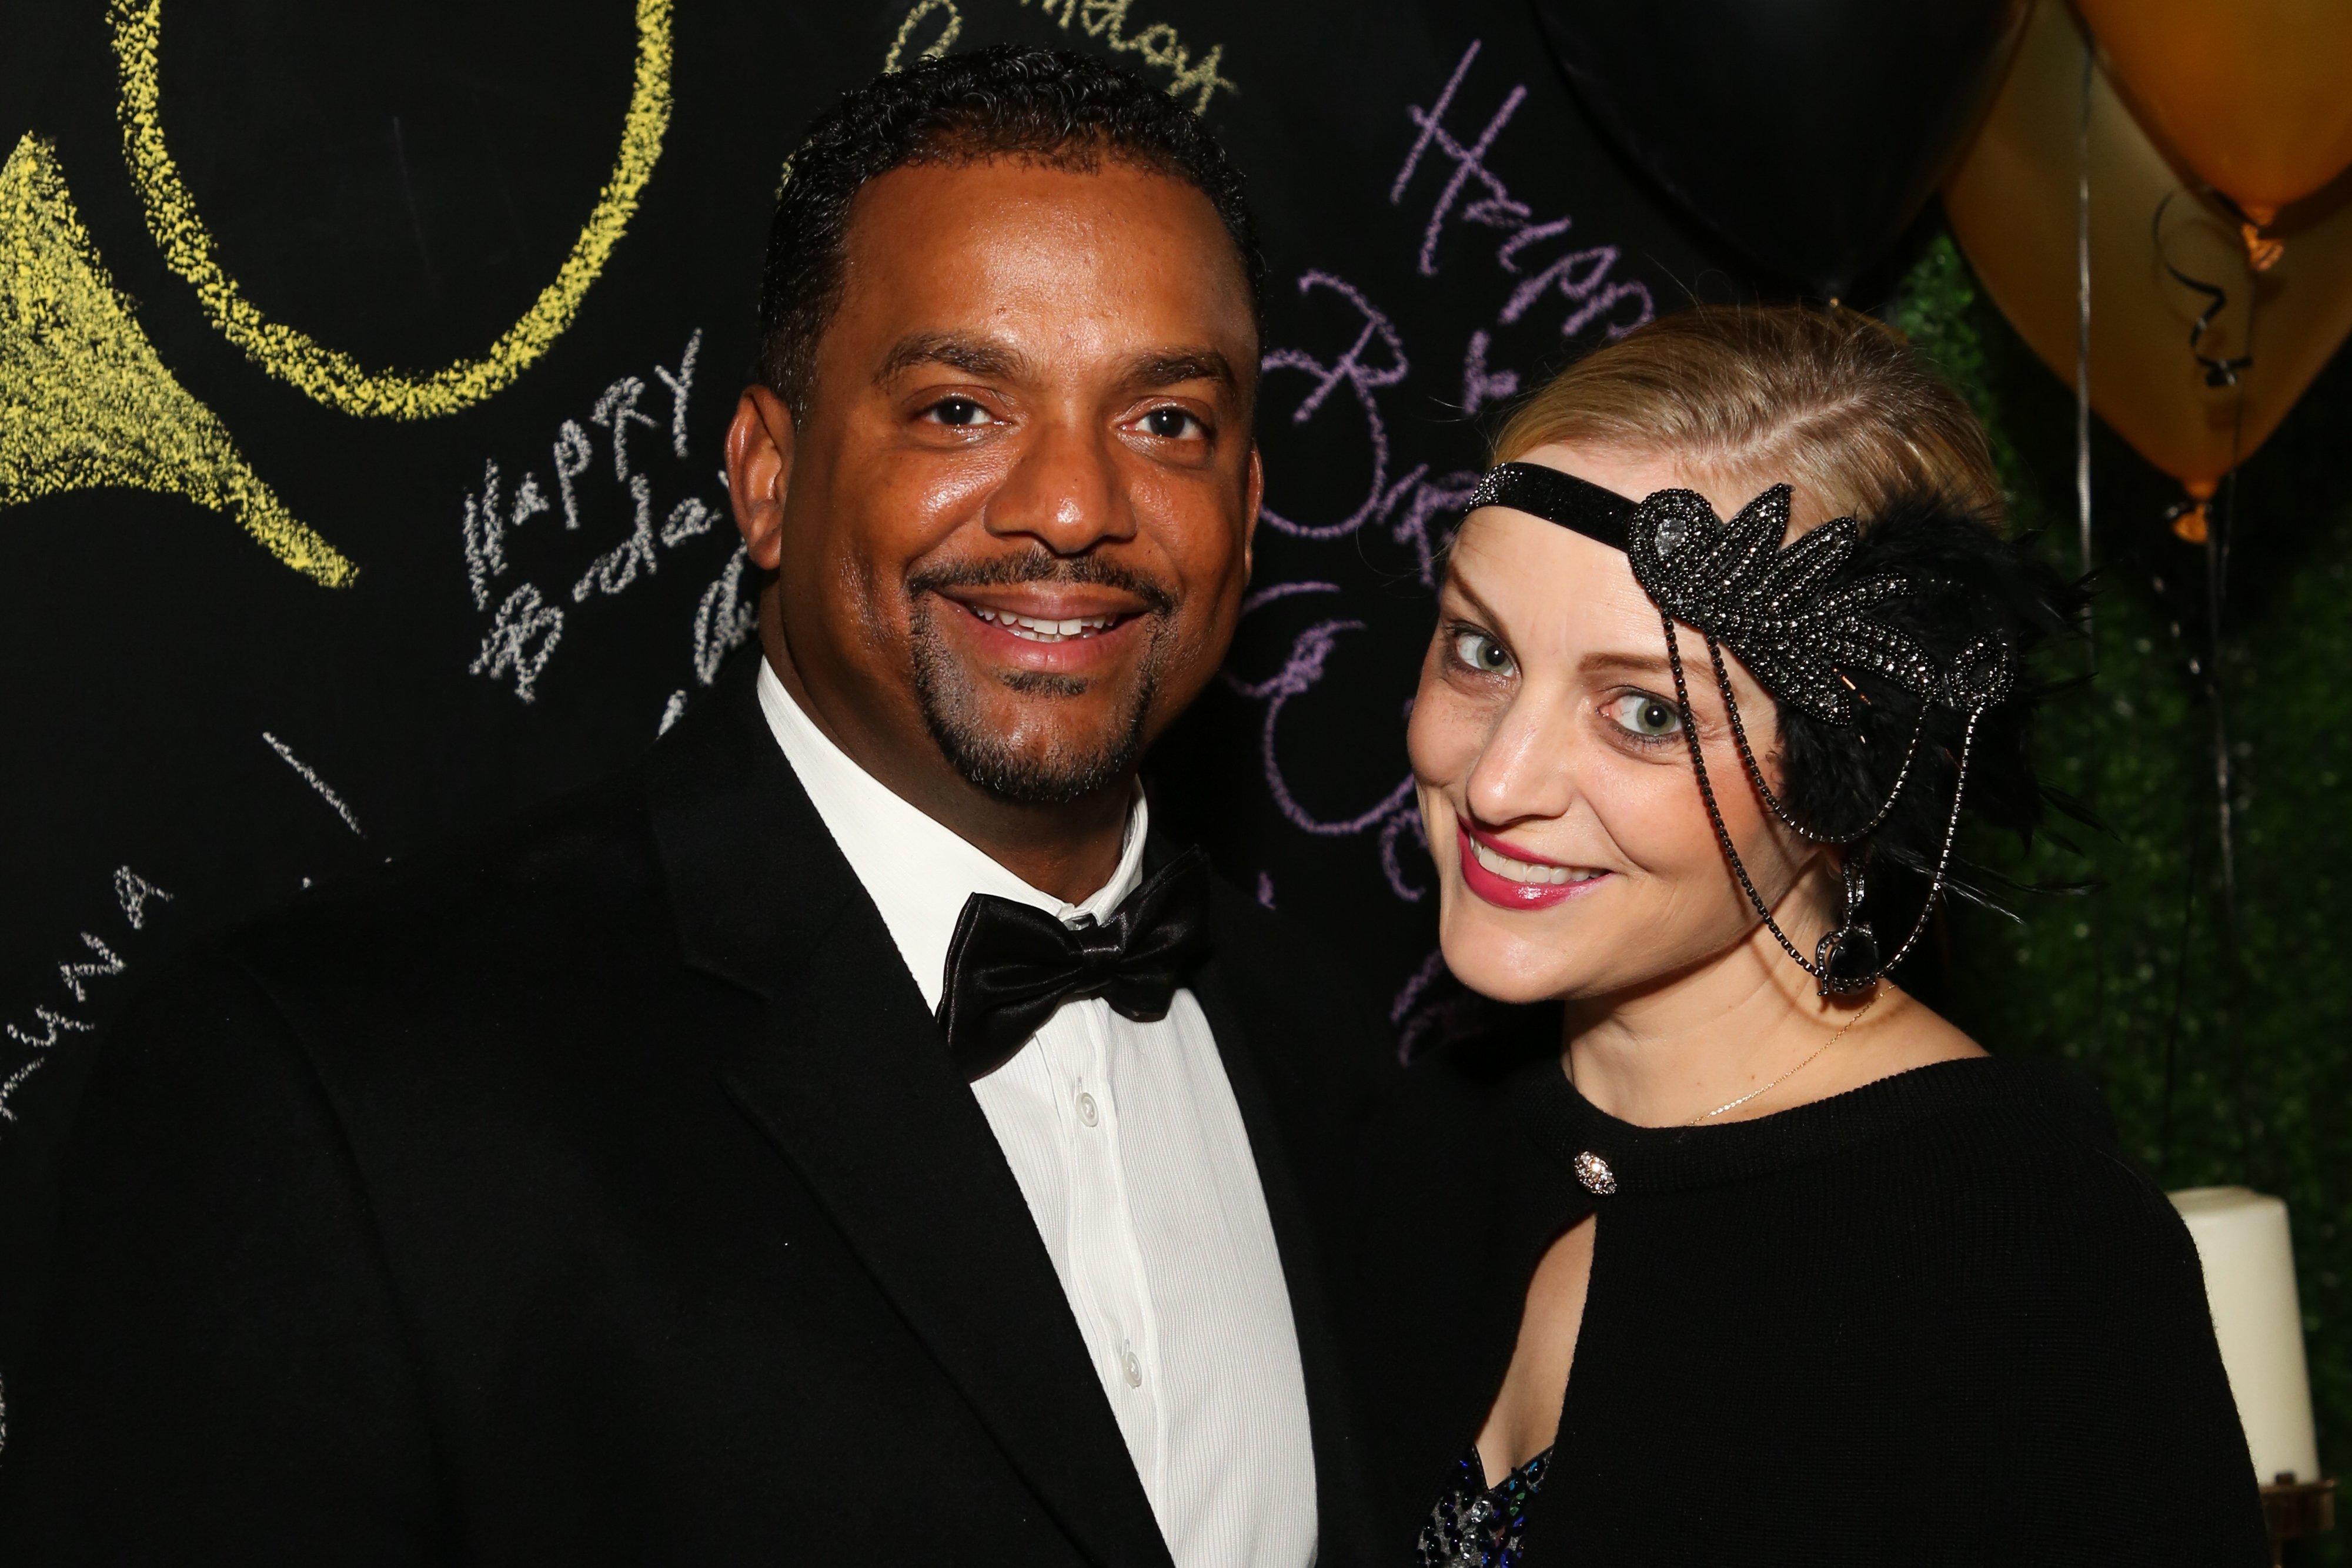 TV host Alfonso Ribeiro and his wife Angela Unkrich at Keo Motsepe's birthday party on November 30, 2019 in Los Angeles, California. | Photo: Getty Images